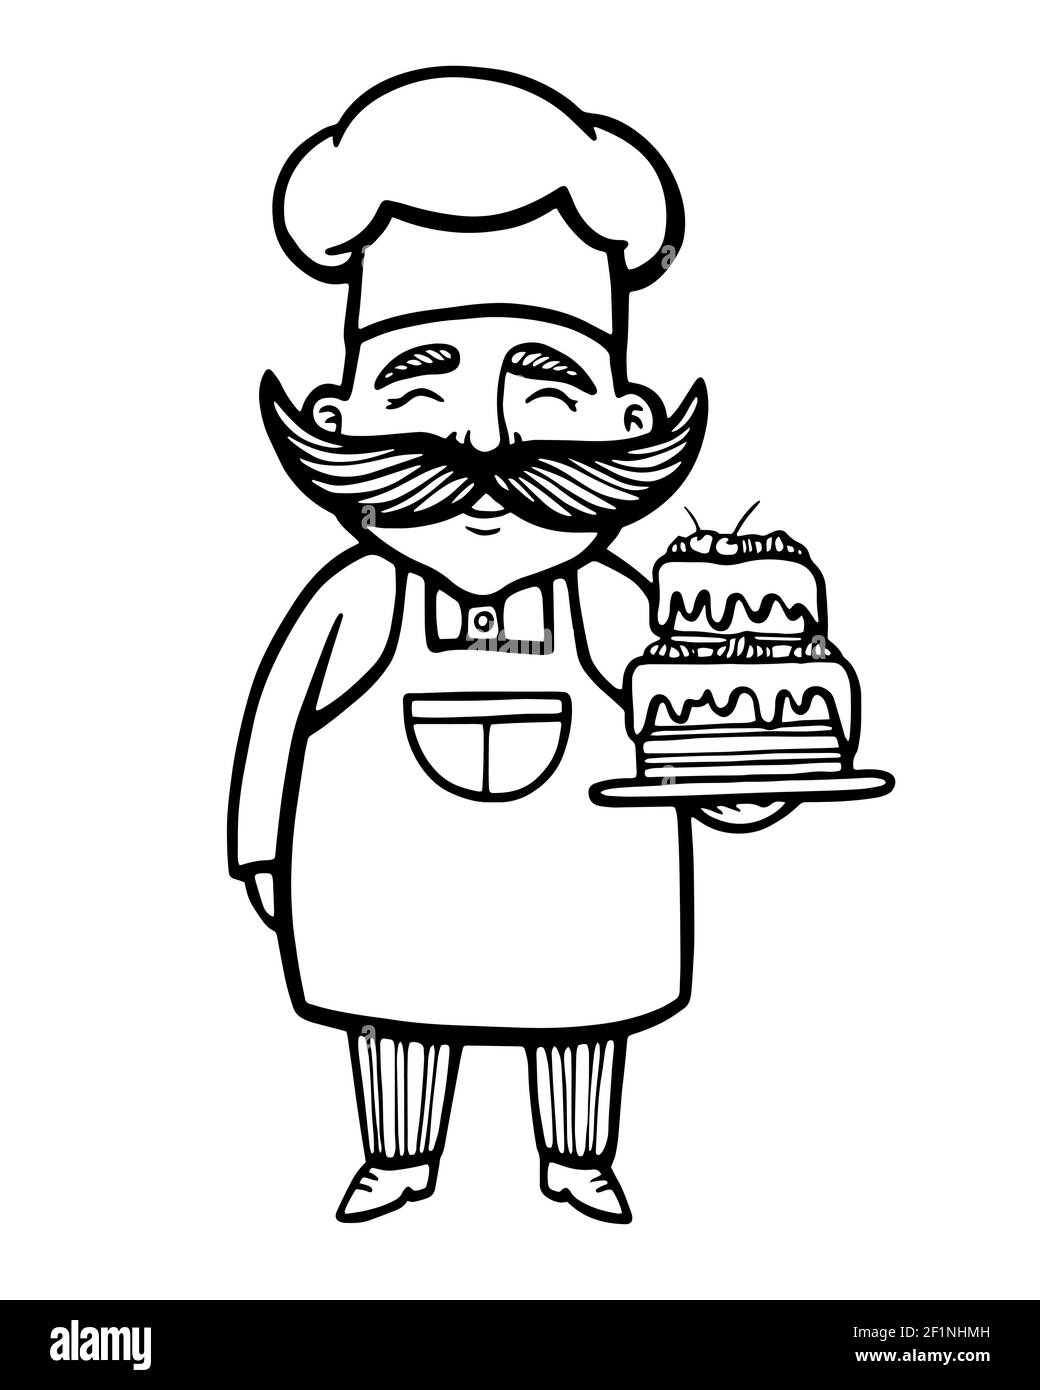 Bakery. Hand drawn vector illustration of chef-cooker with a mustache and cake. chef cake logo. Confectionery logo Stock Vector